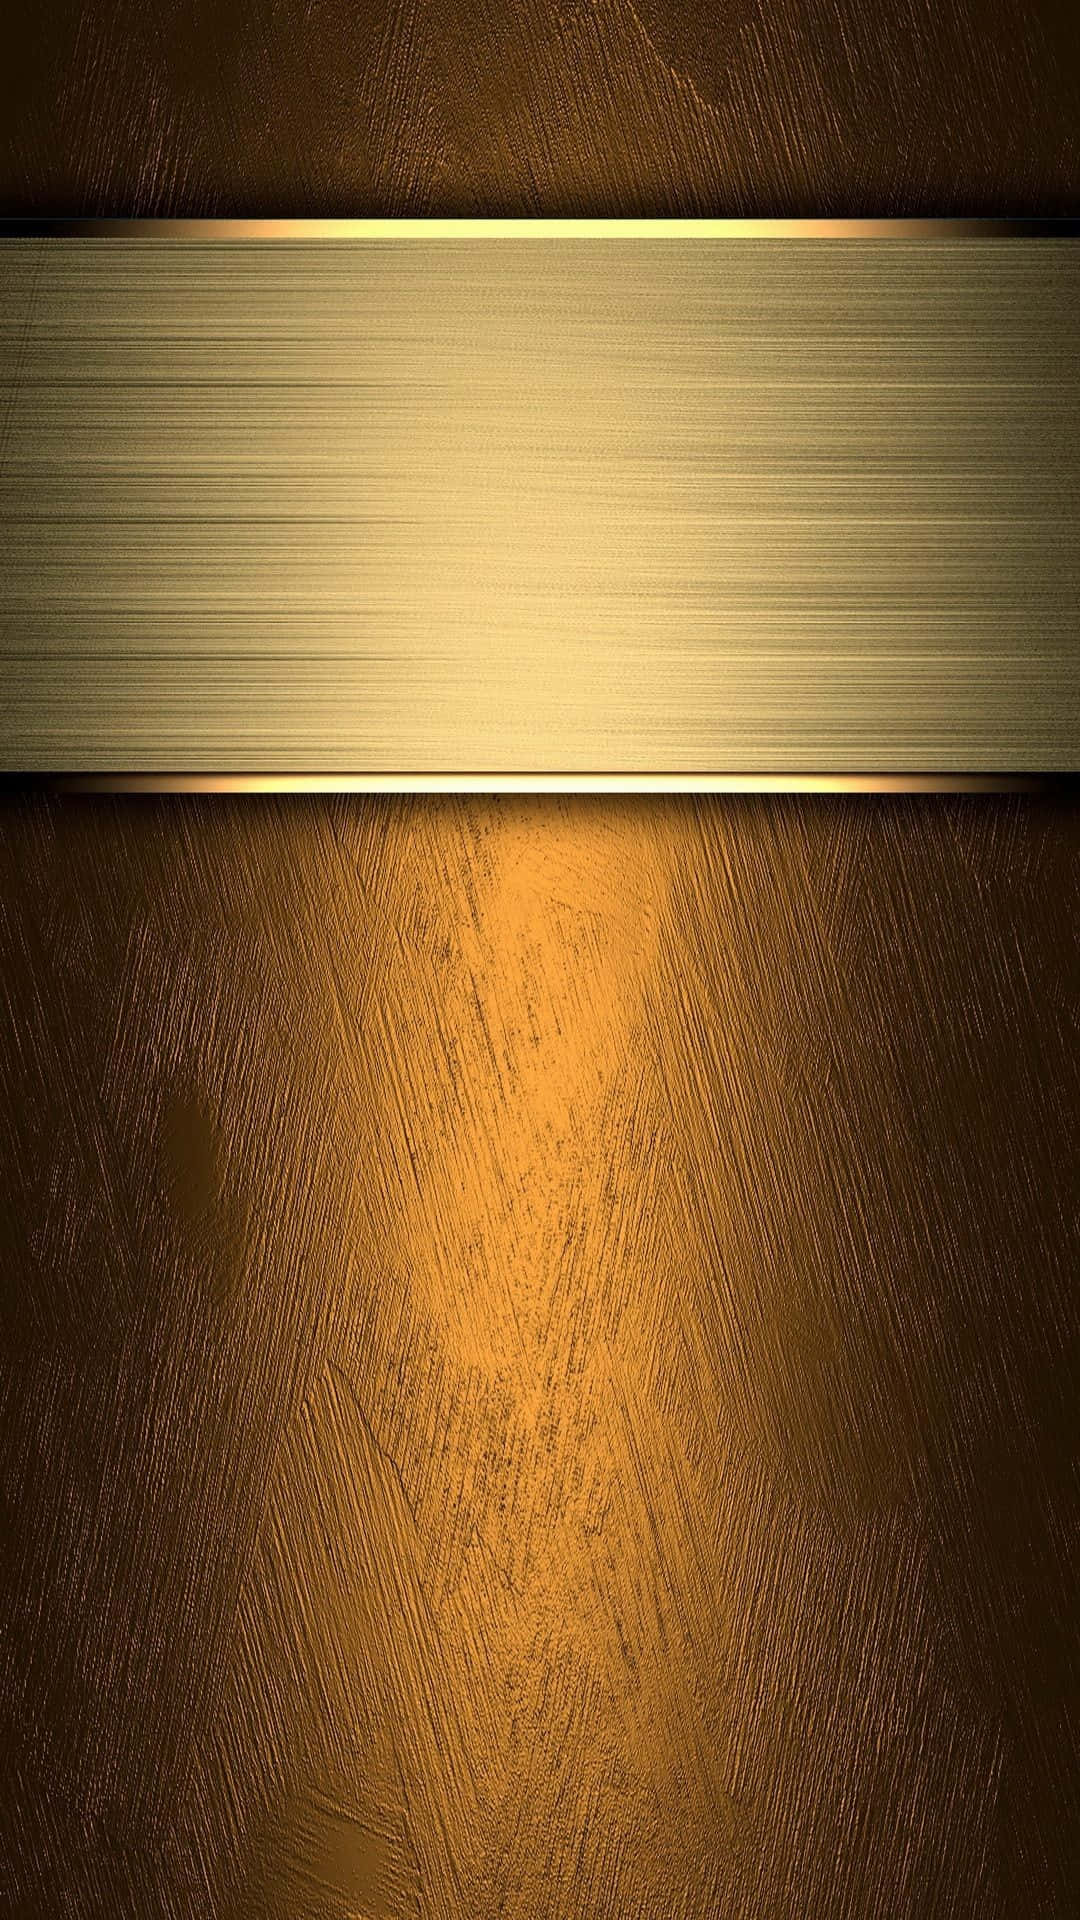 Upgrade Your Smartphone to the Stunning Gold Iphone Wallpaper